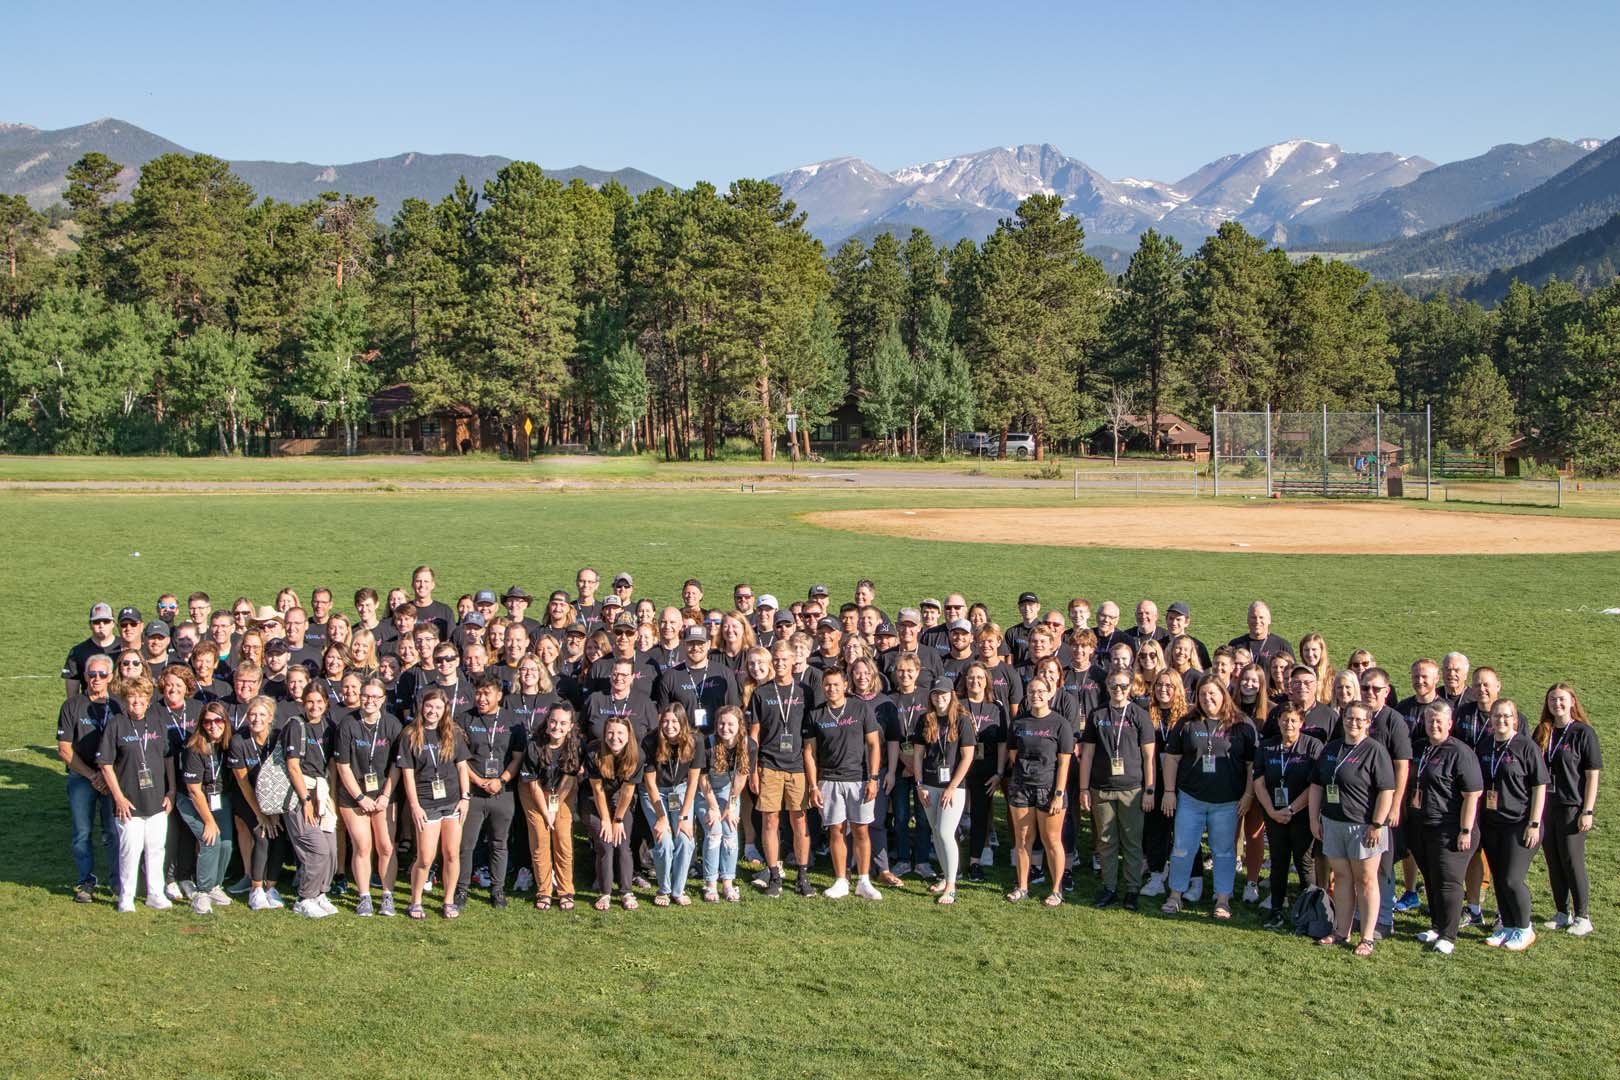 Large group outside in baseball diamond with mountains in the background